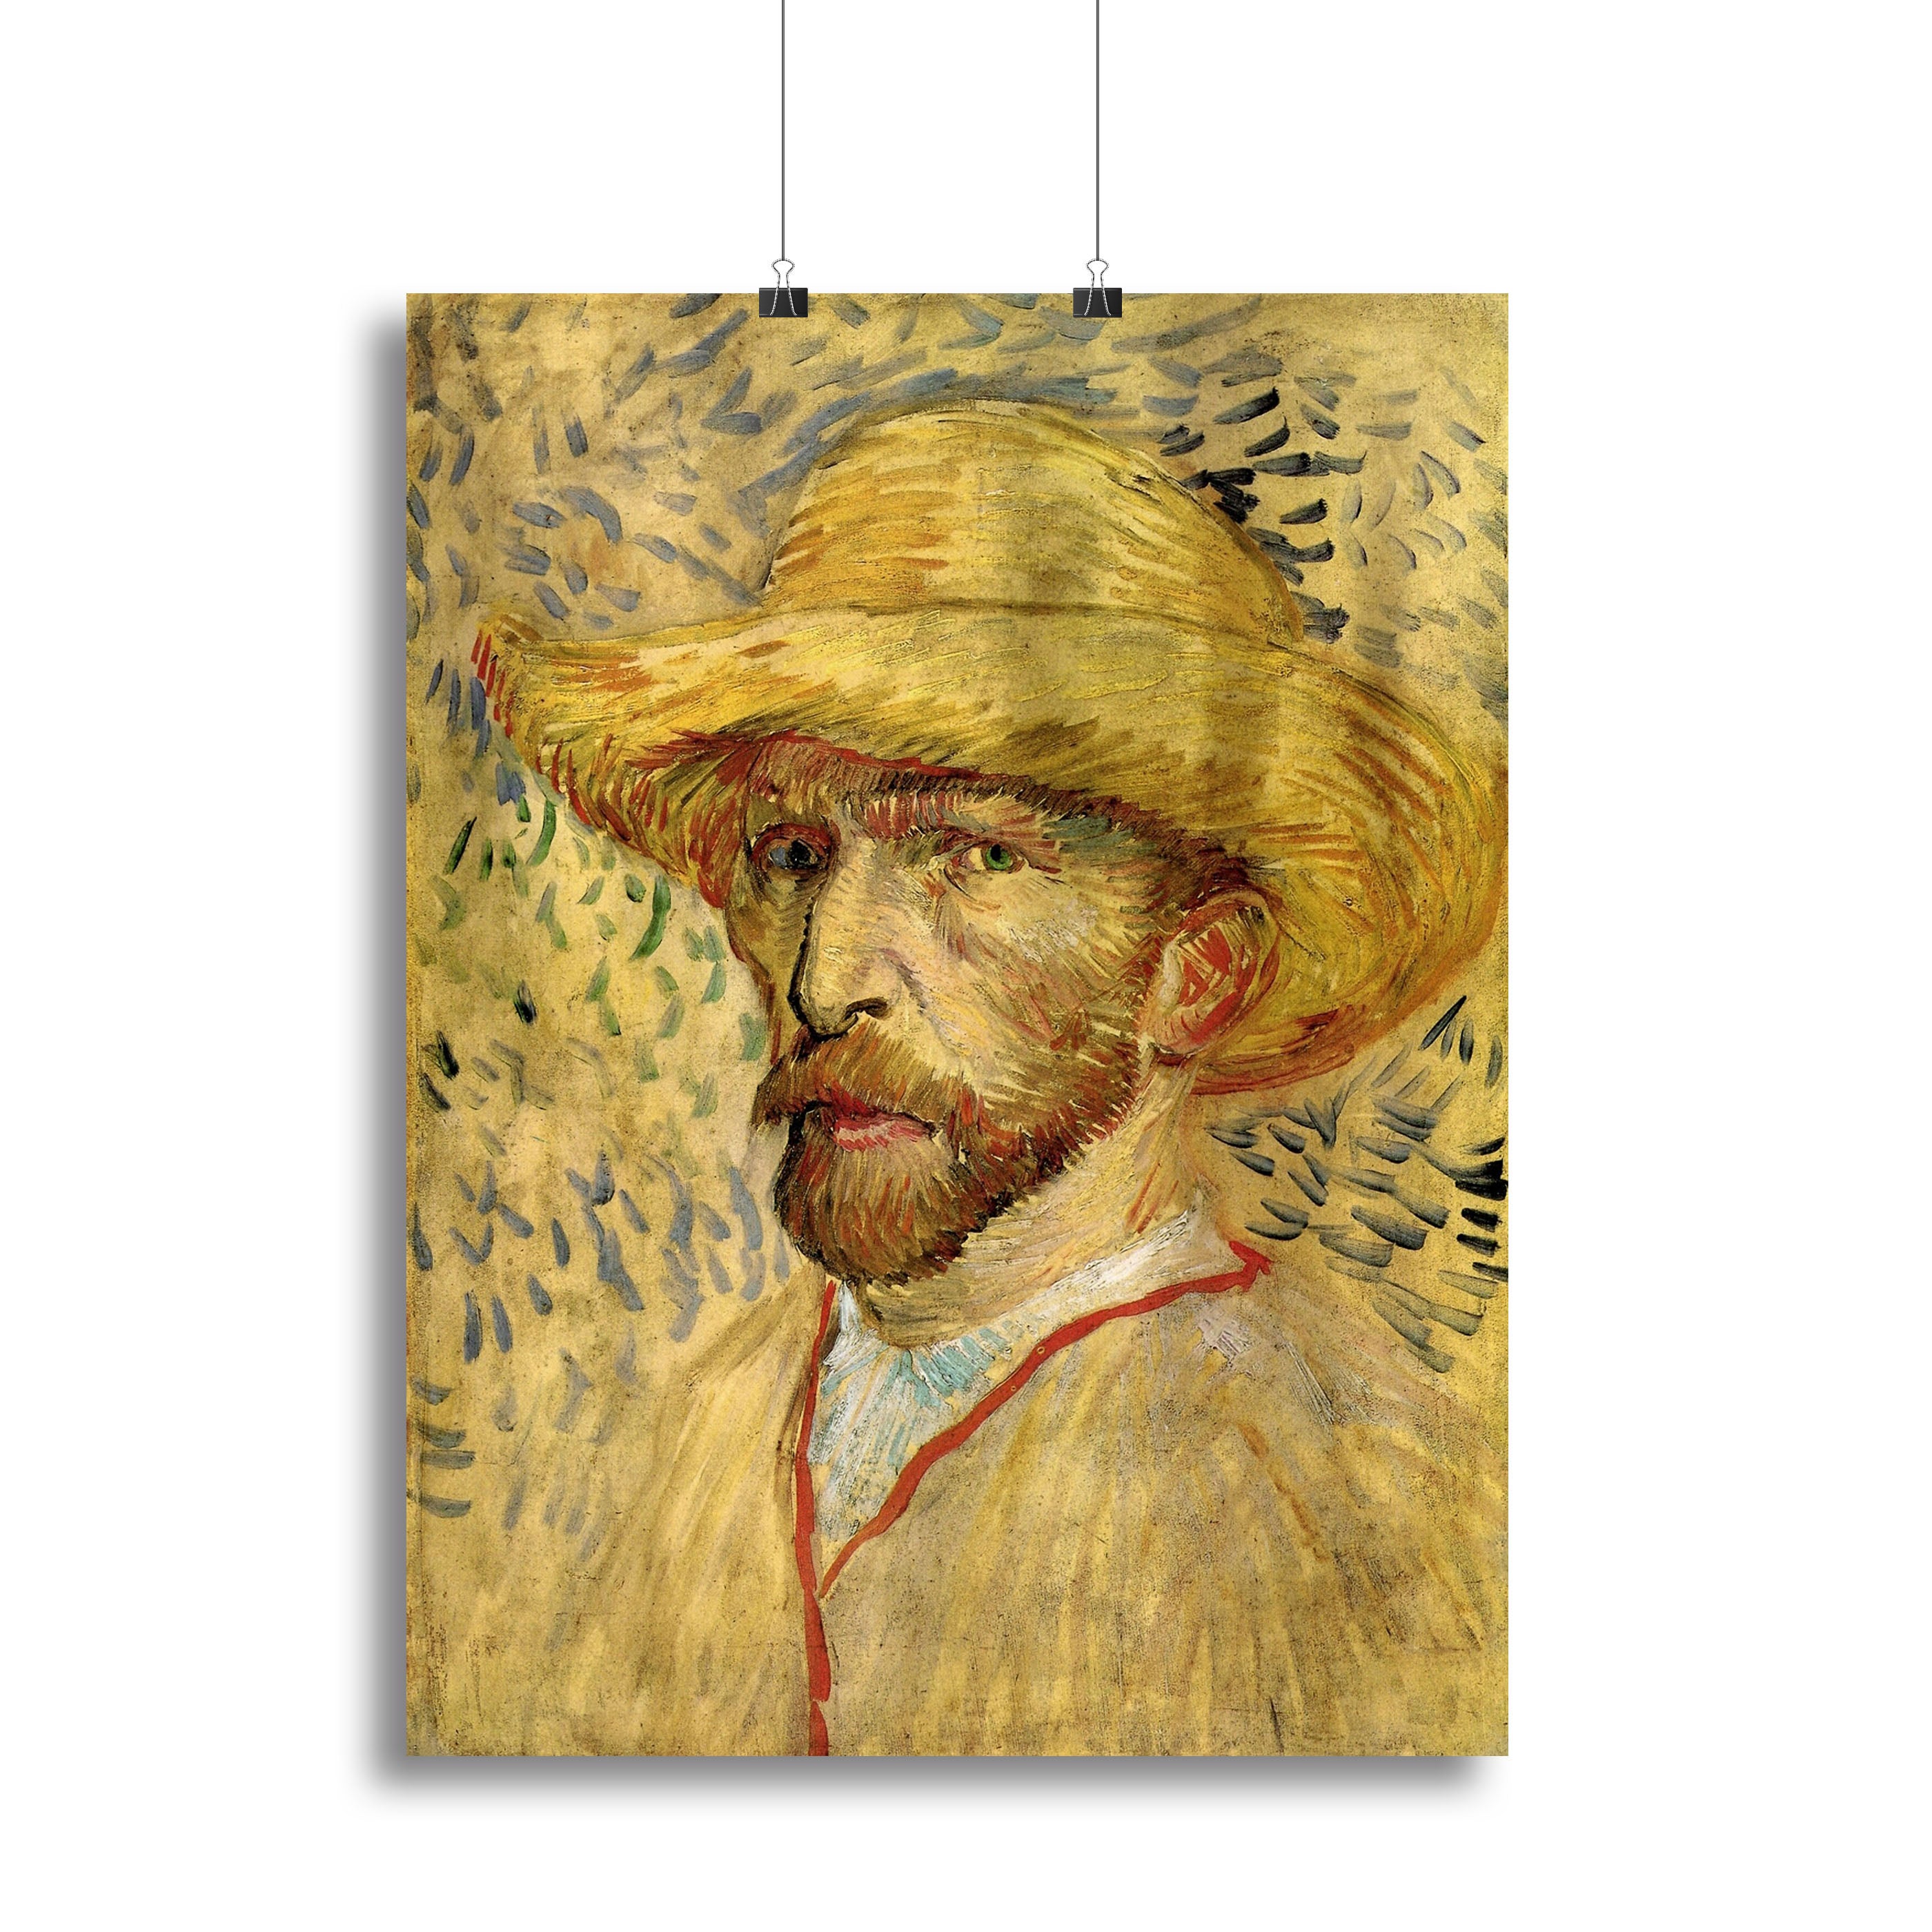 Self-Portrait with Straw Hat 2 by Van Gogh Canvas Print or Poster - Canvas Art Rocks - 2